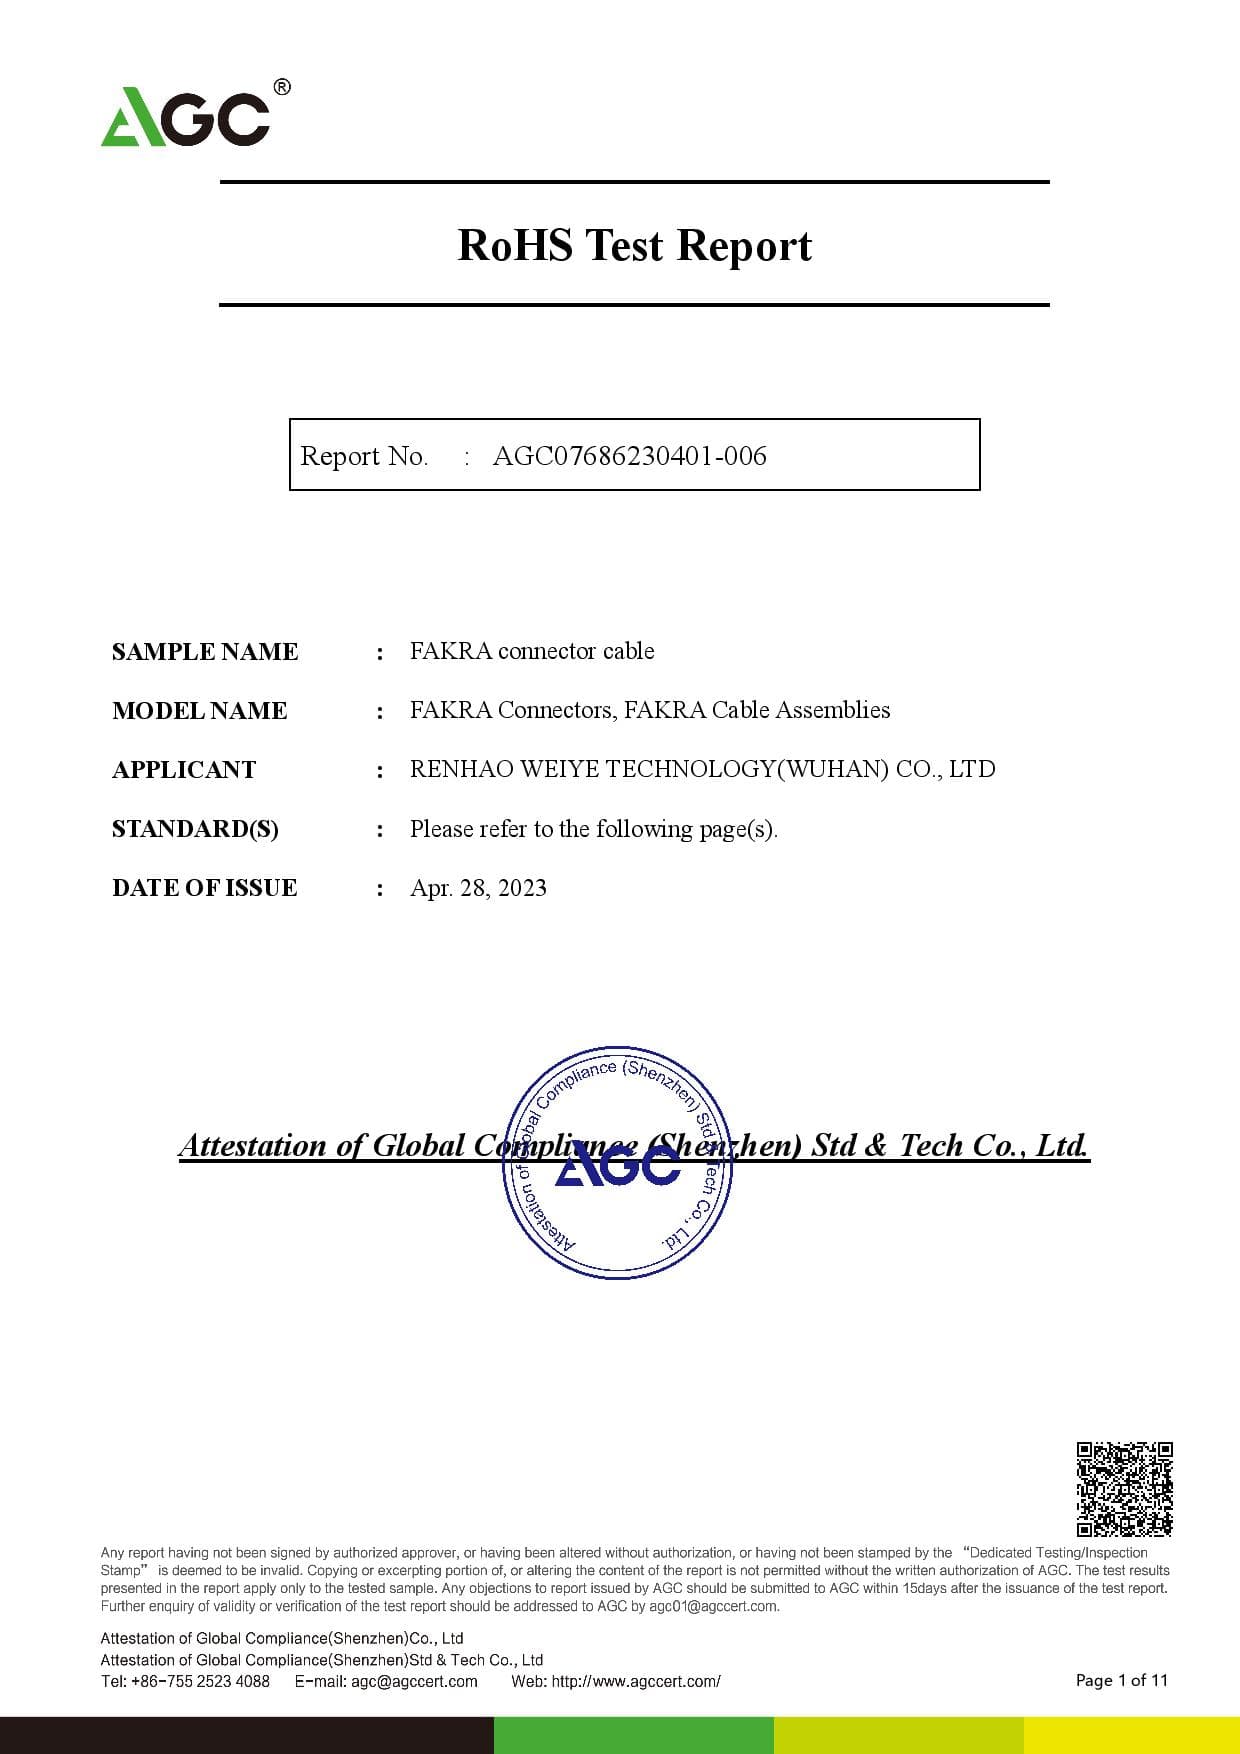 ROHS Test Report AGC07686230401-006 Fakra Connector Cable